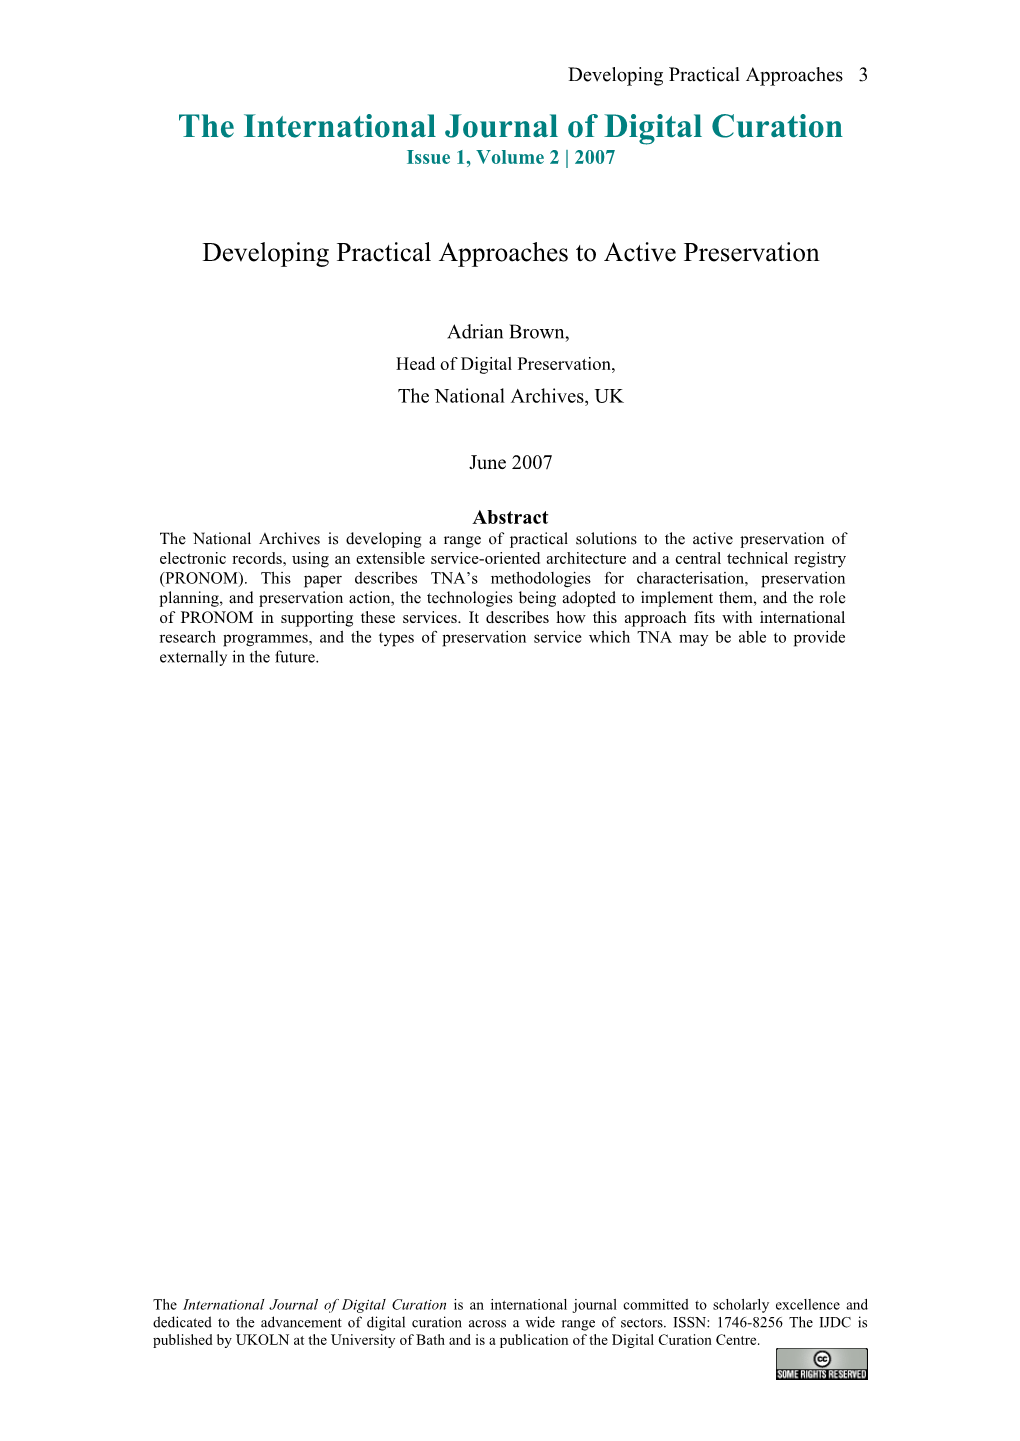 Developing Practical Approaches to Active Preservation